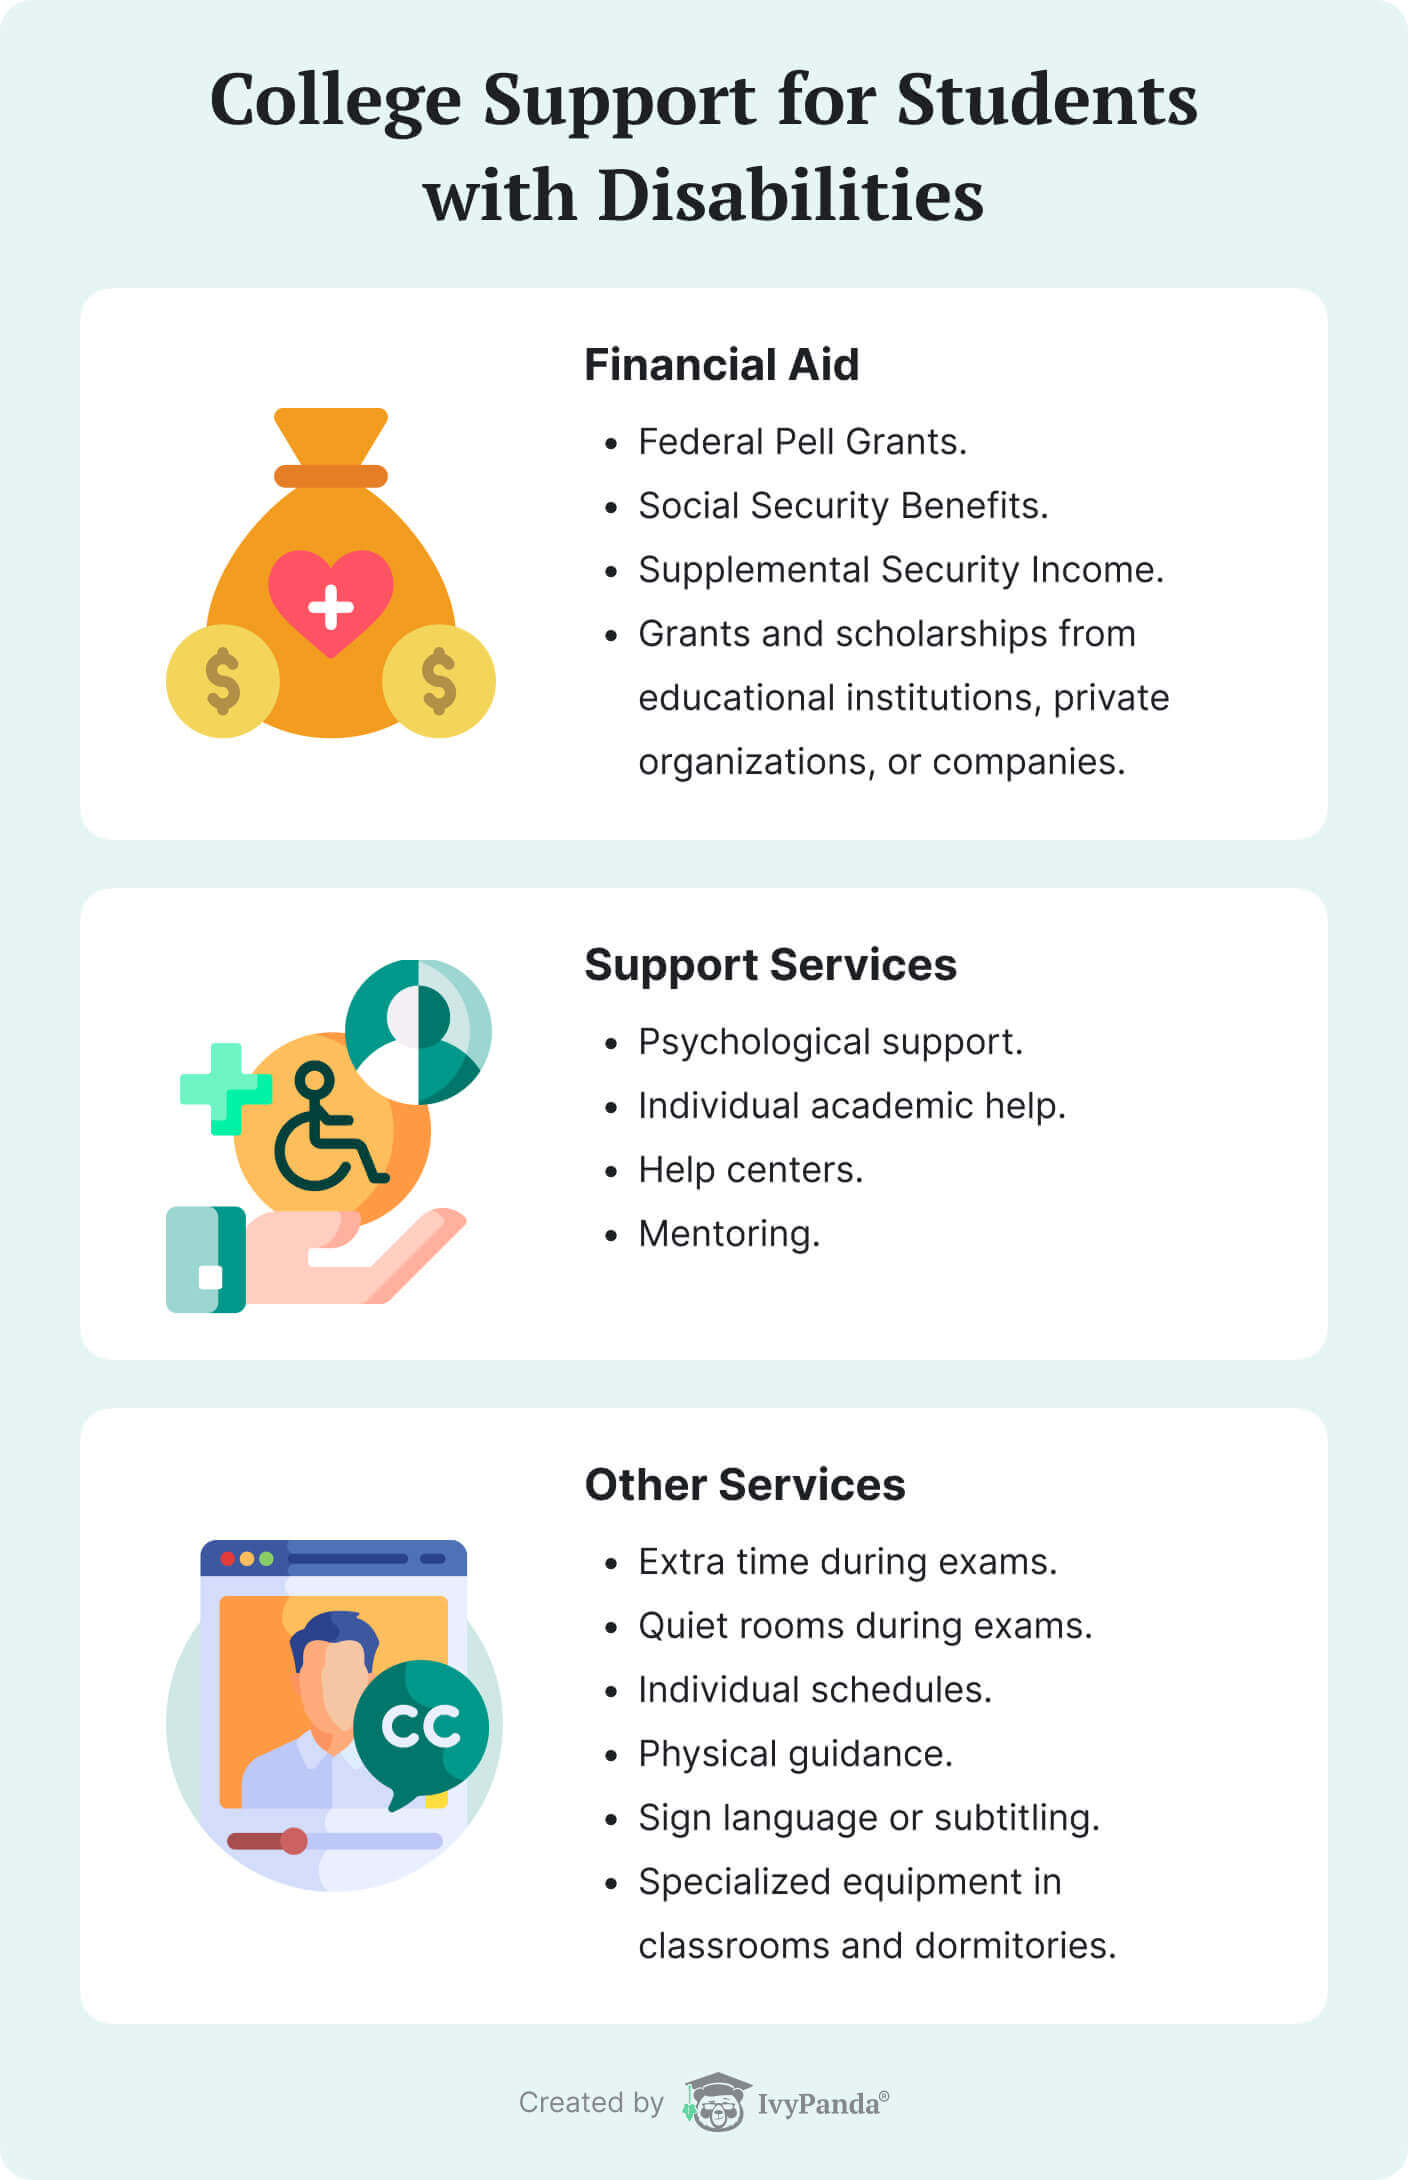 The picture shows the key support services for students with impairments.